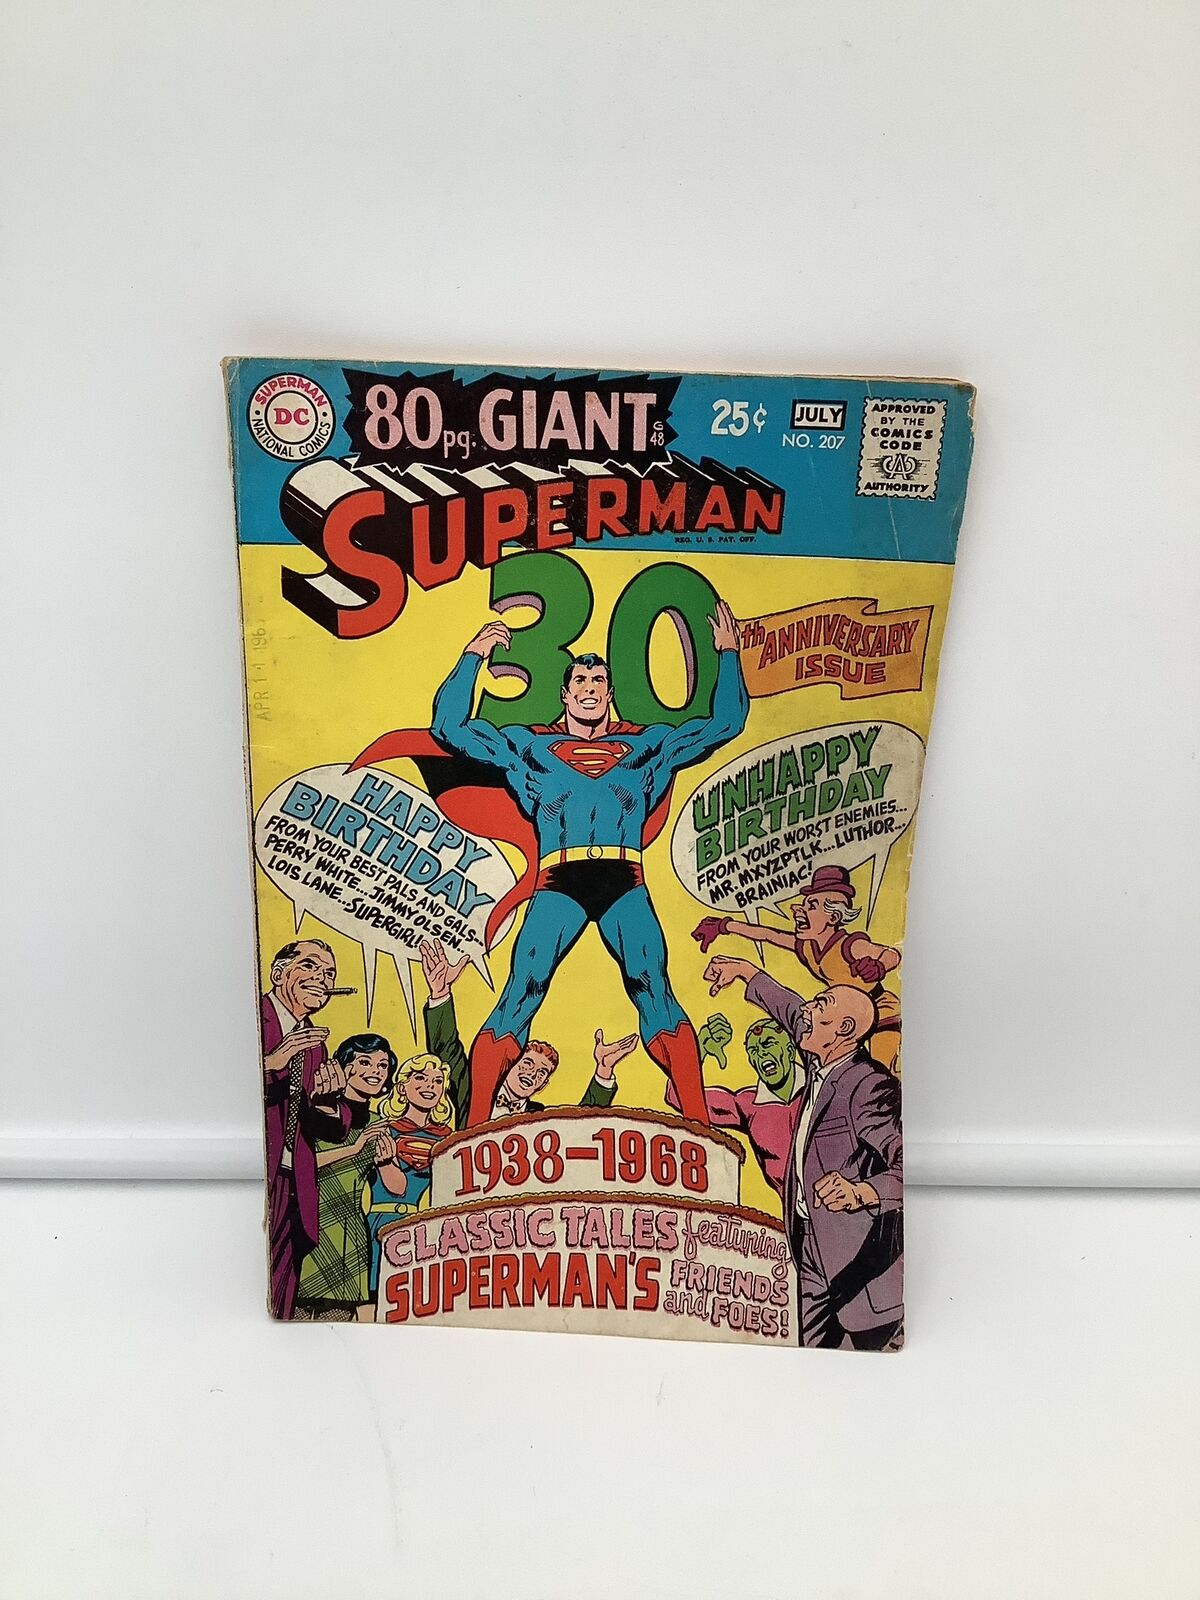 Superman 80 page Giant #202 Issue 1967 Comic Silver Age Used